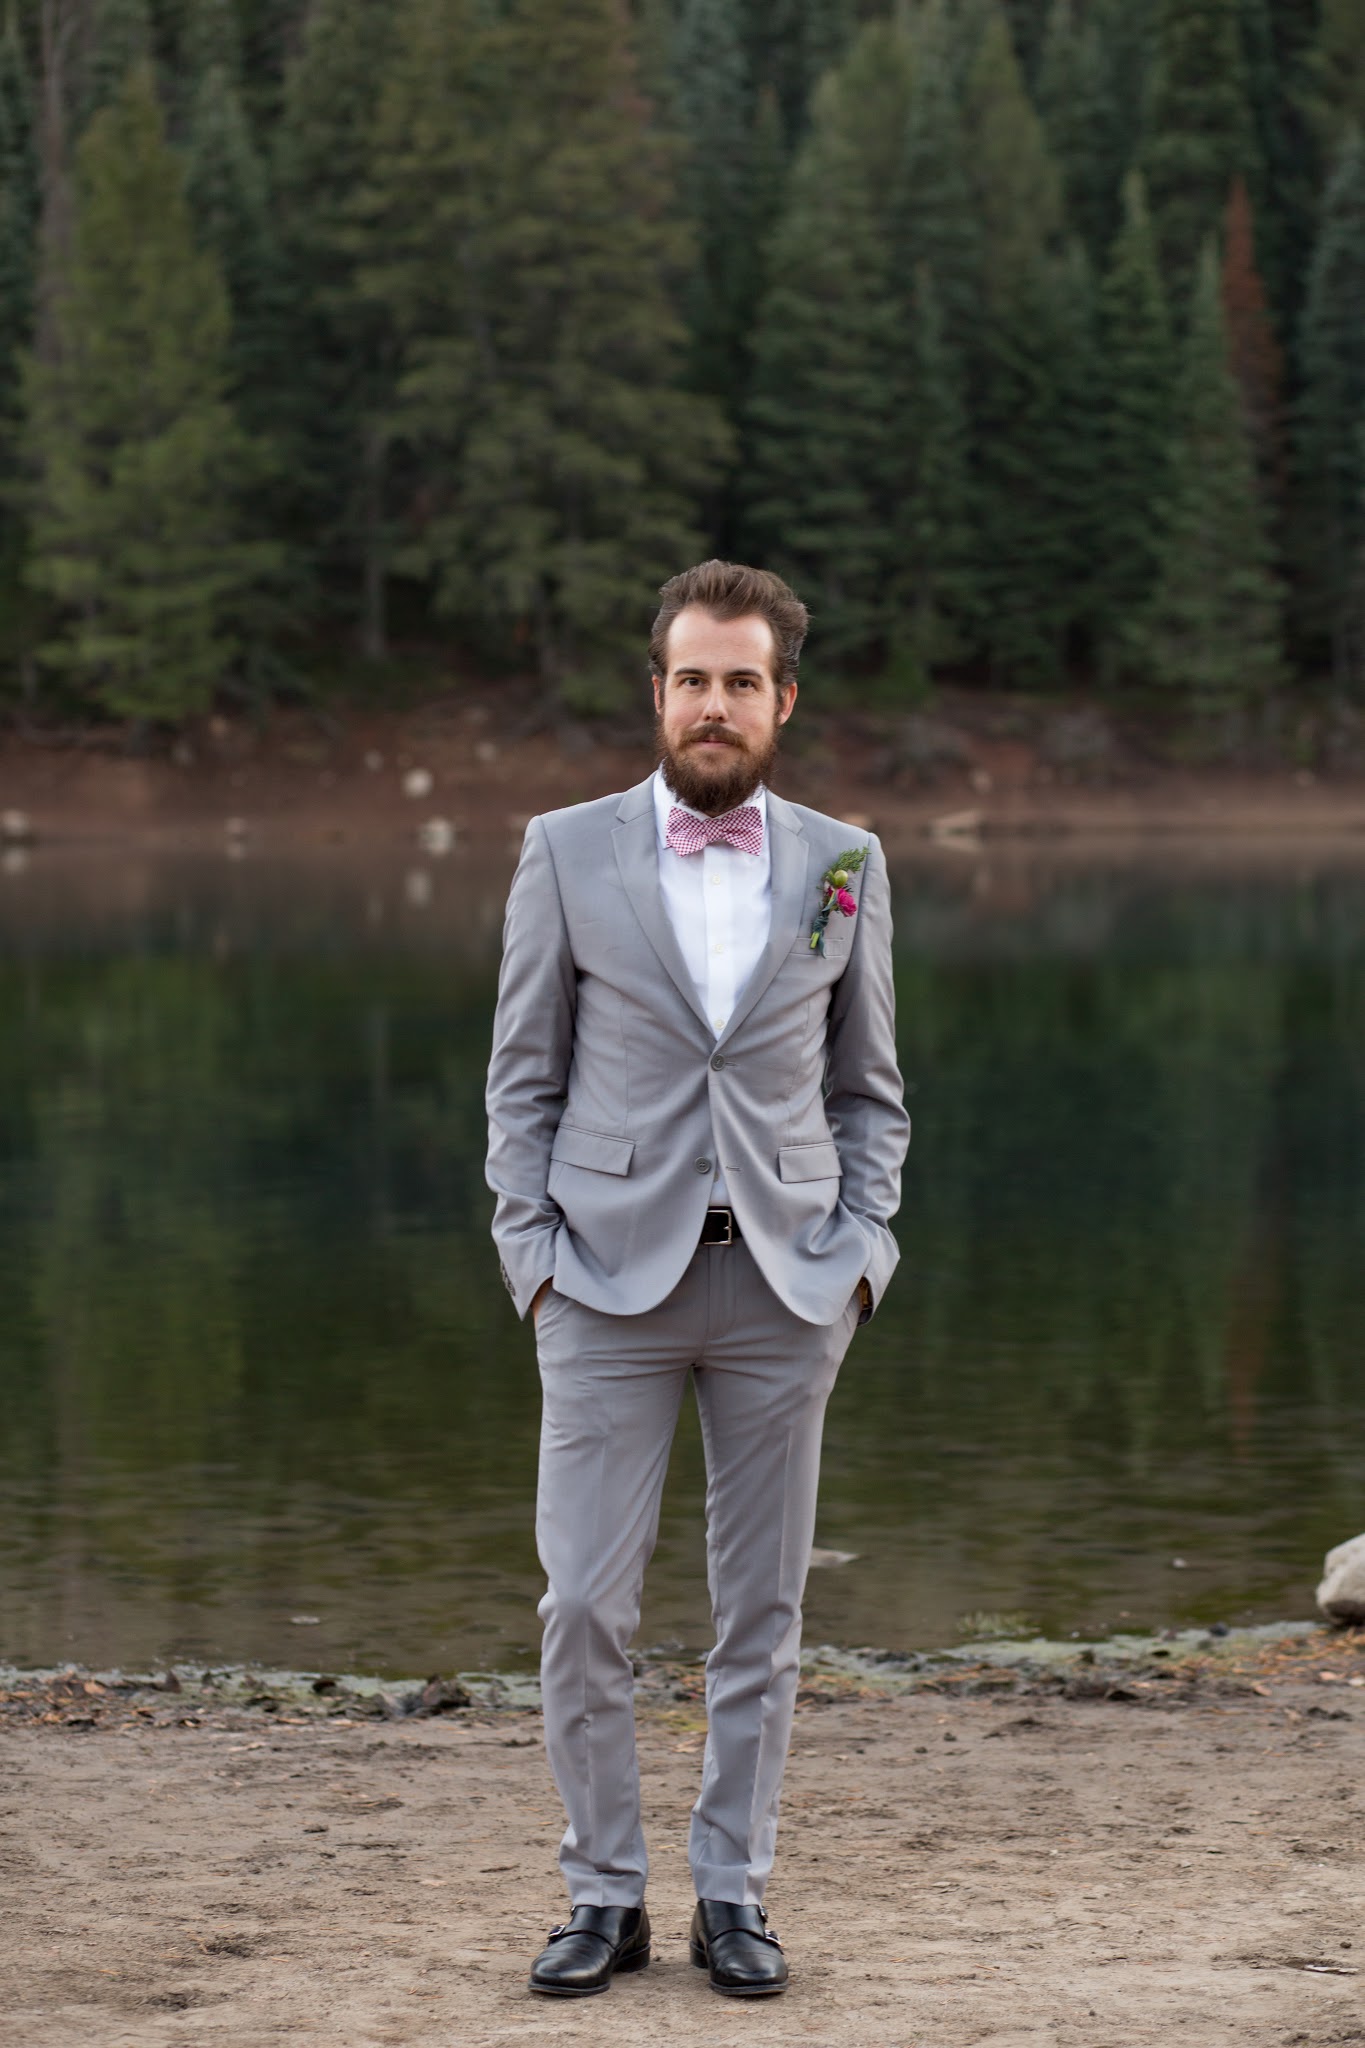 Mens Wedding Style - A Slim Gray Suit